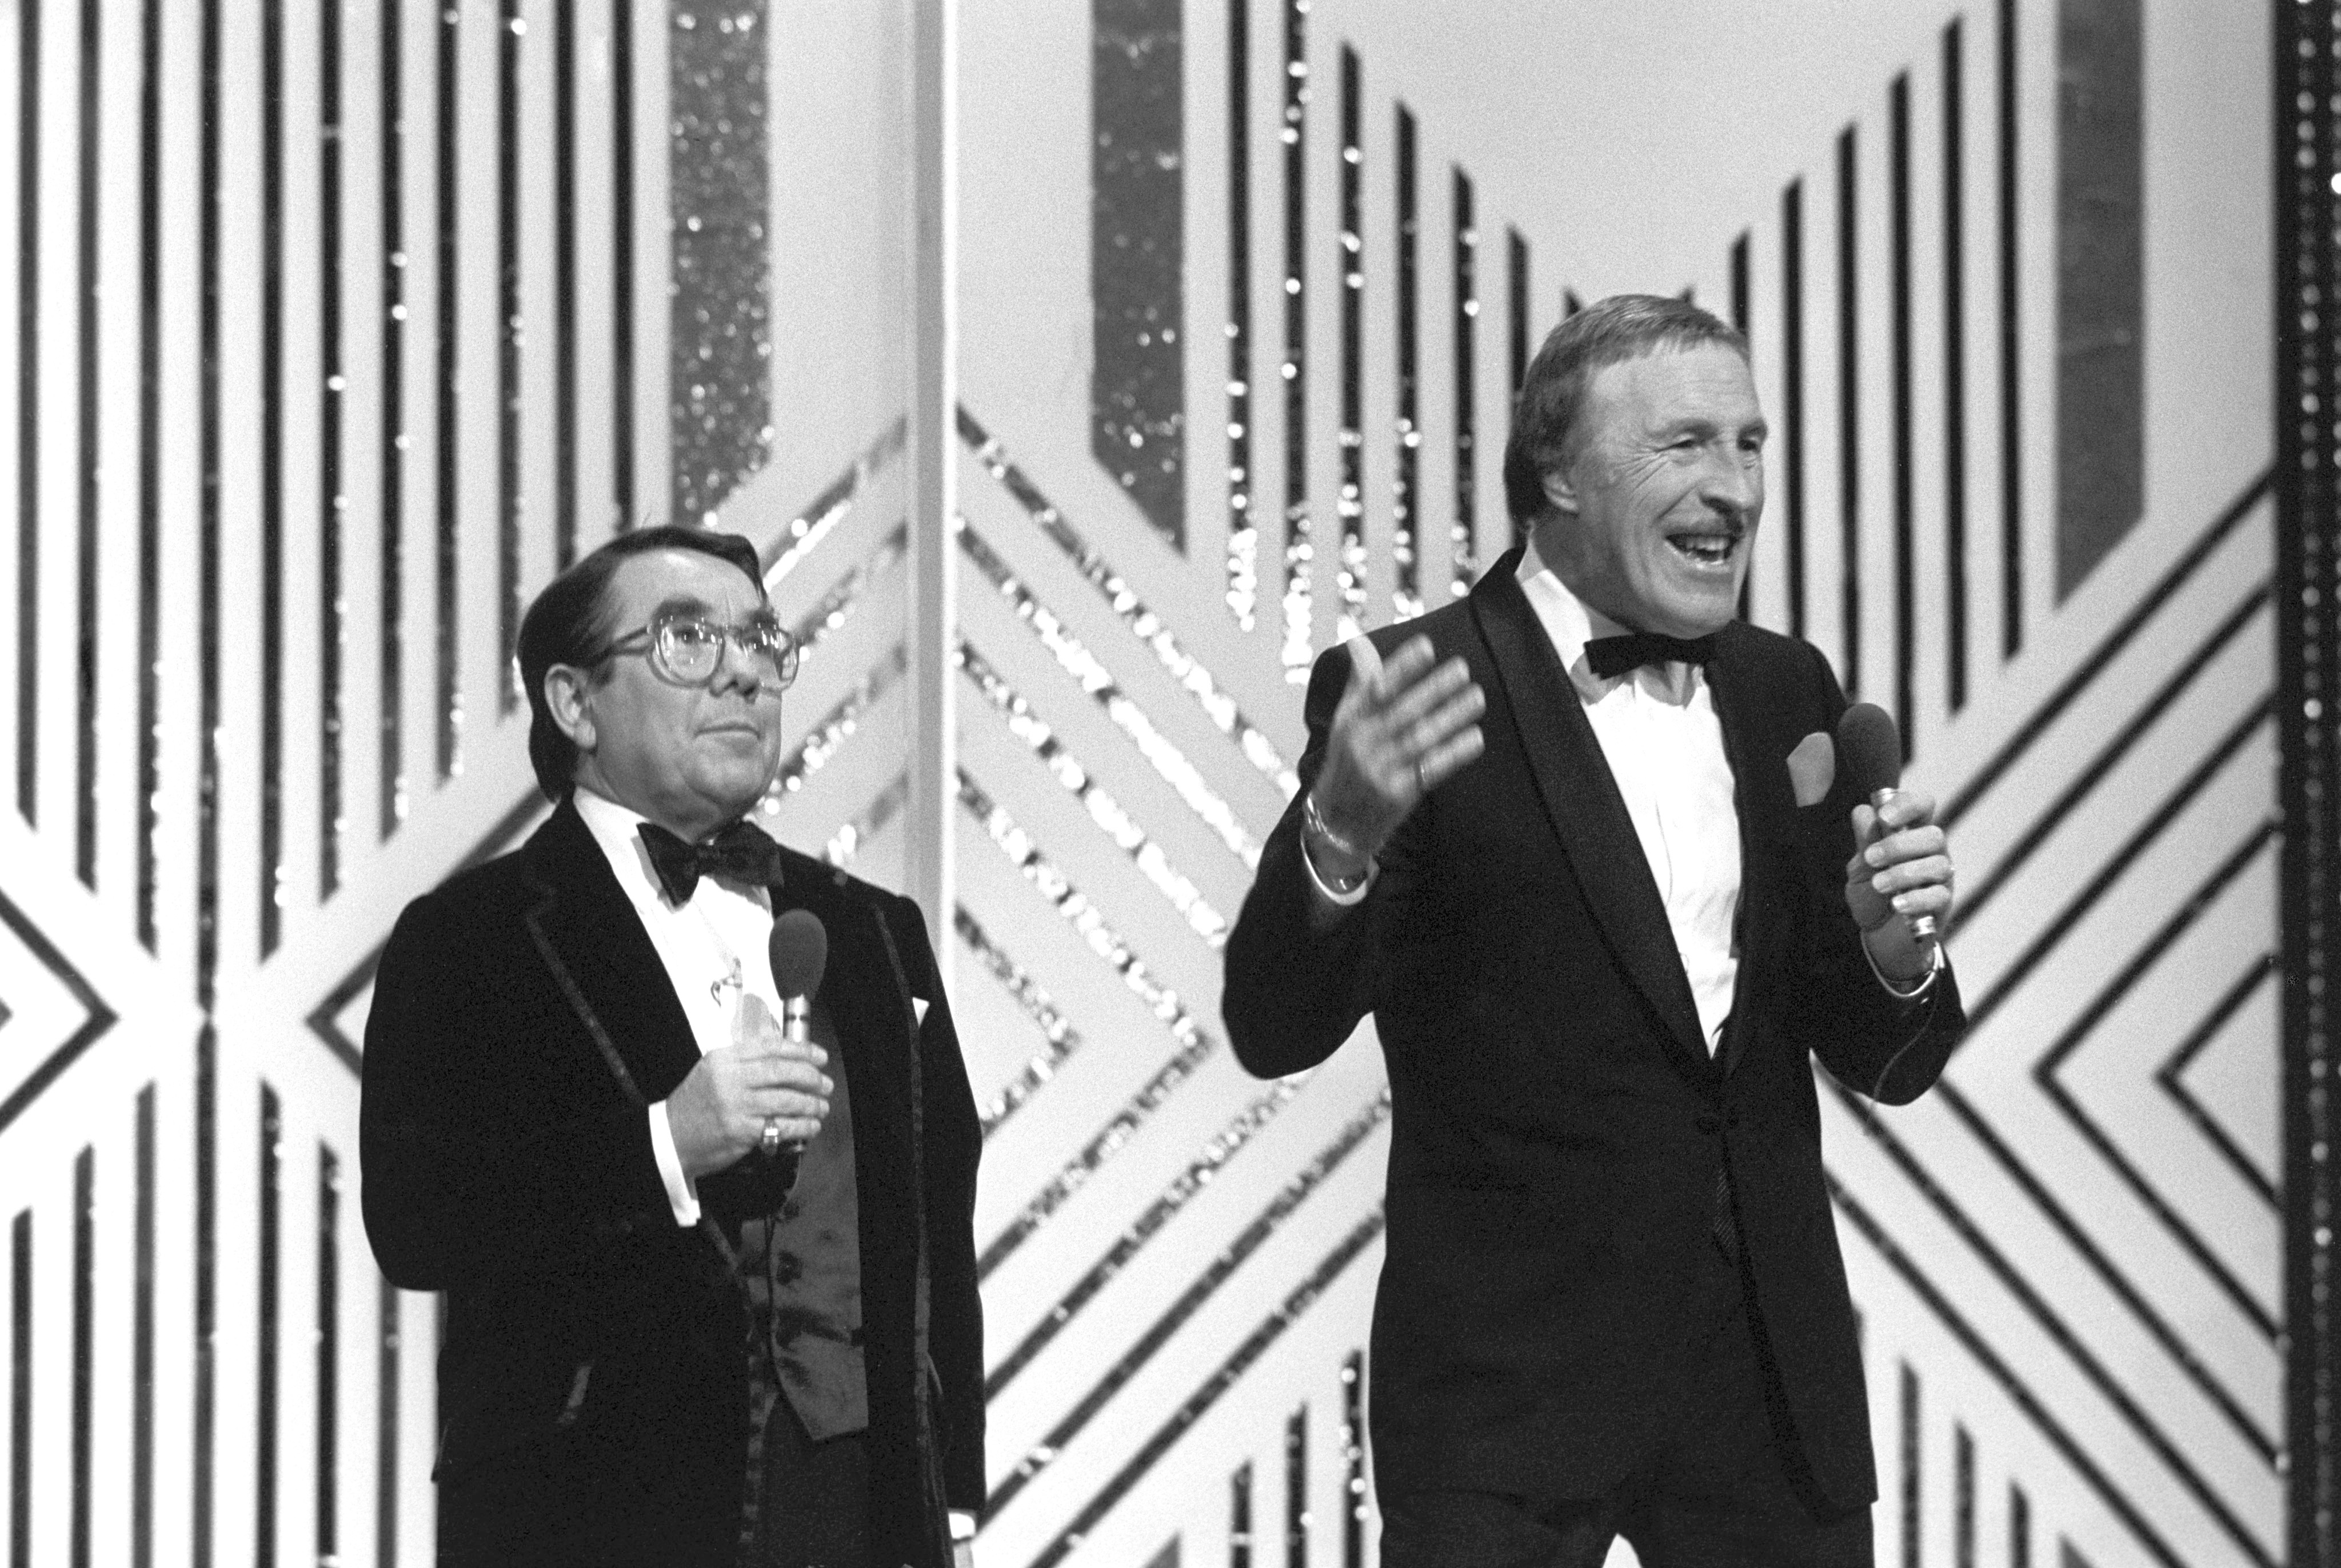 With Ronnie Corbett (PA)